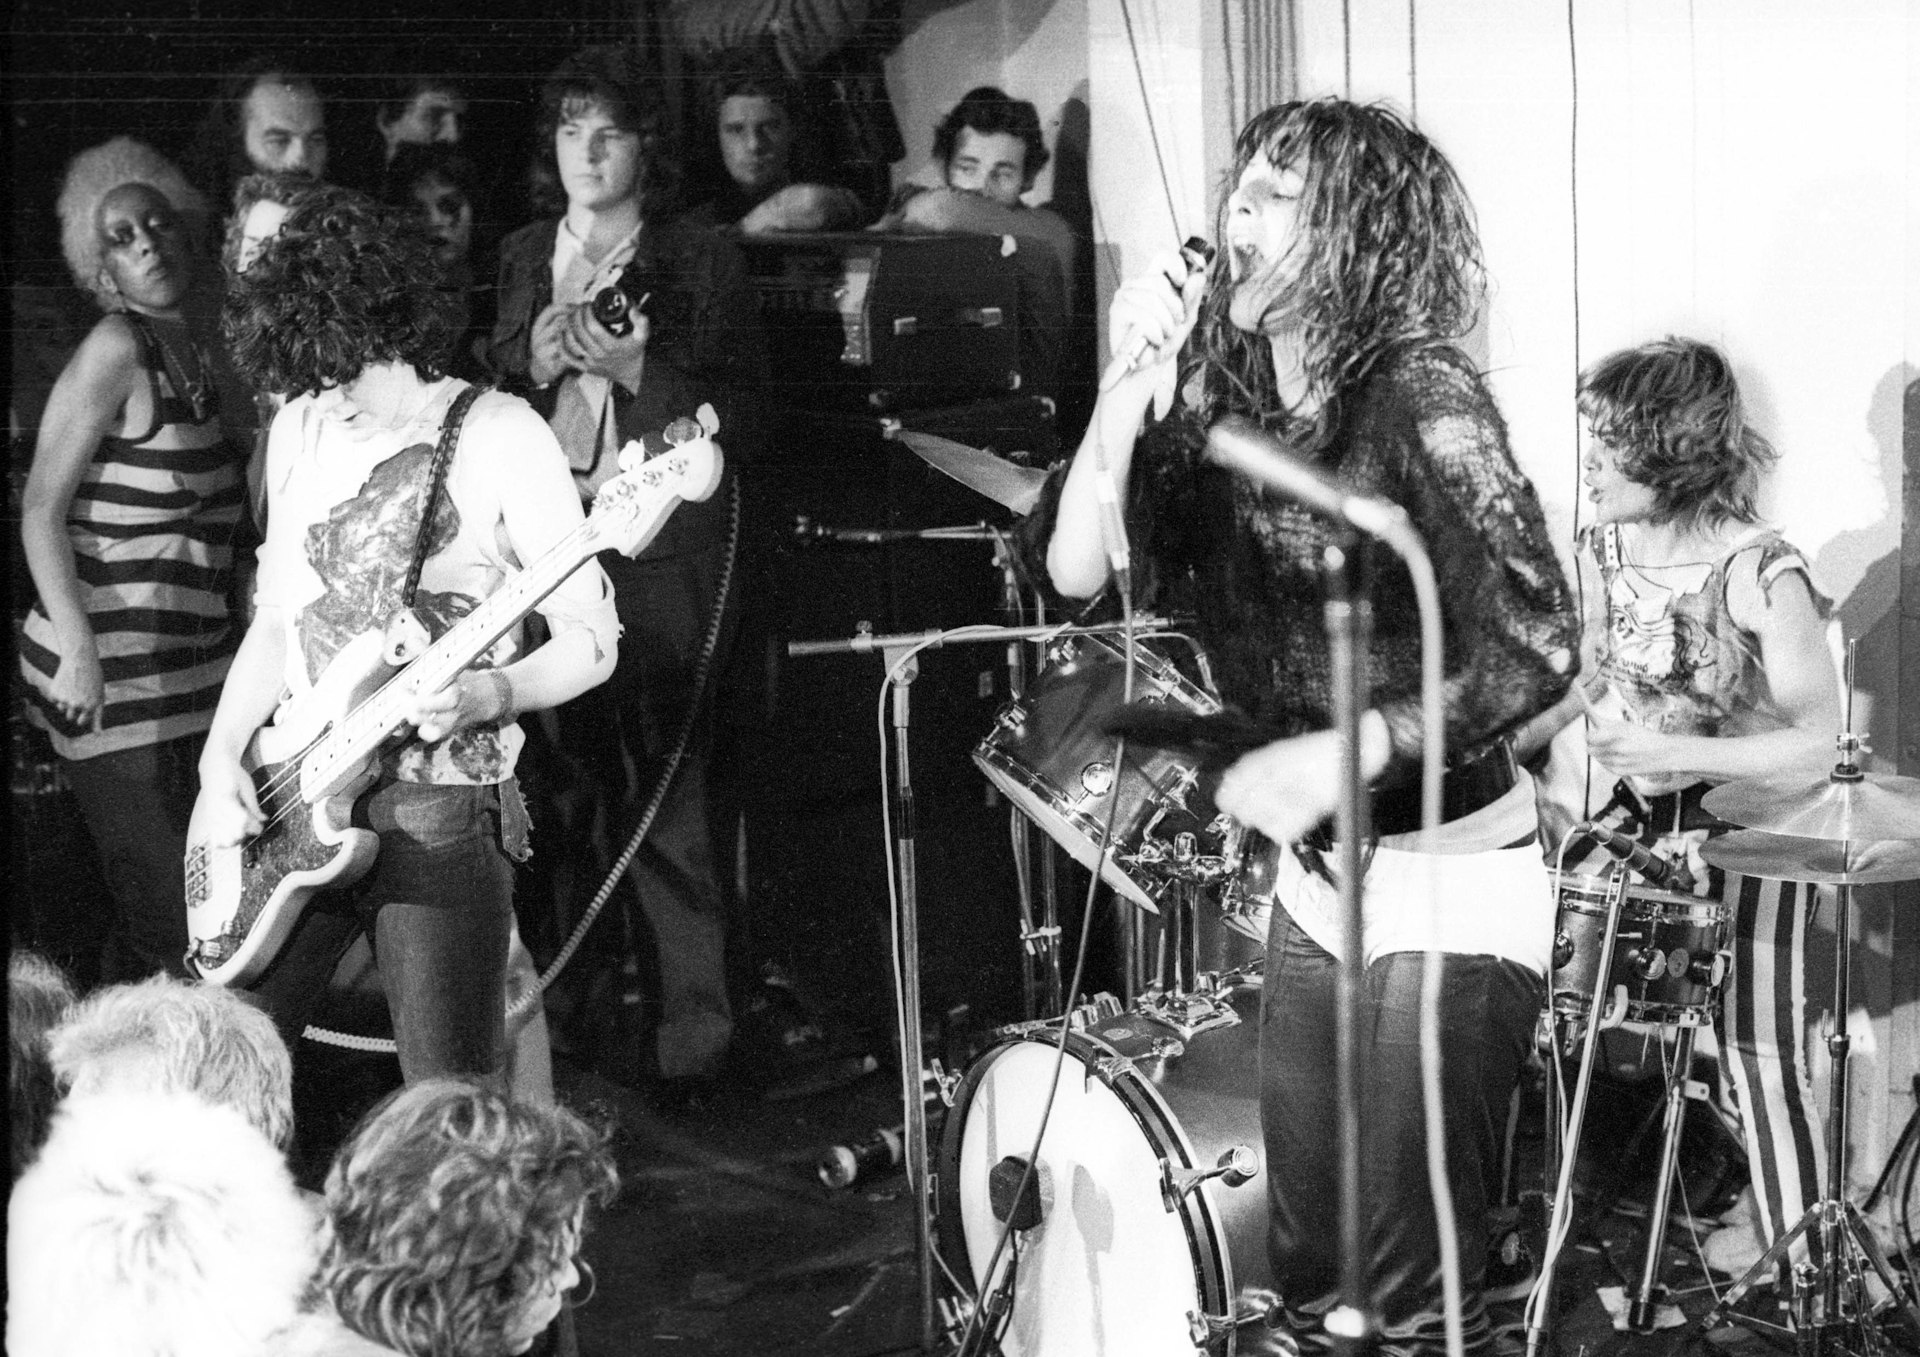 New documentary on The Slits, the first all-girl punk band